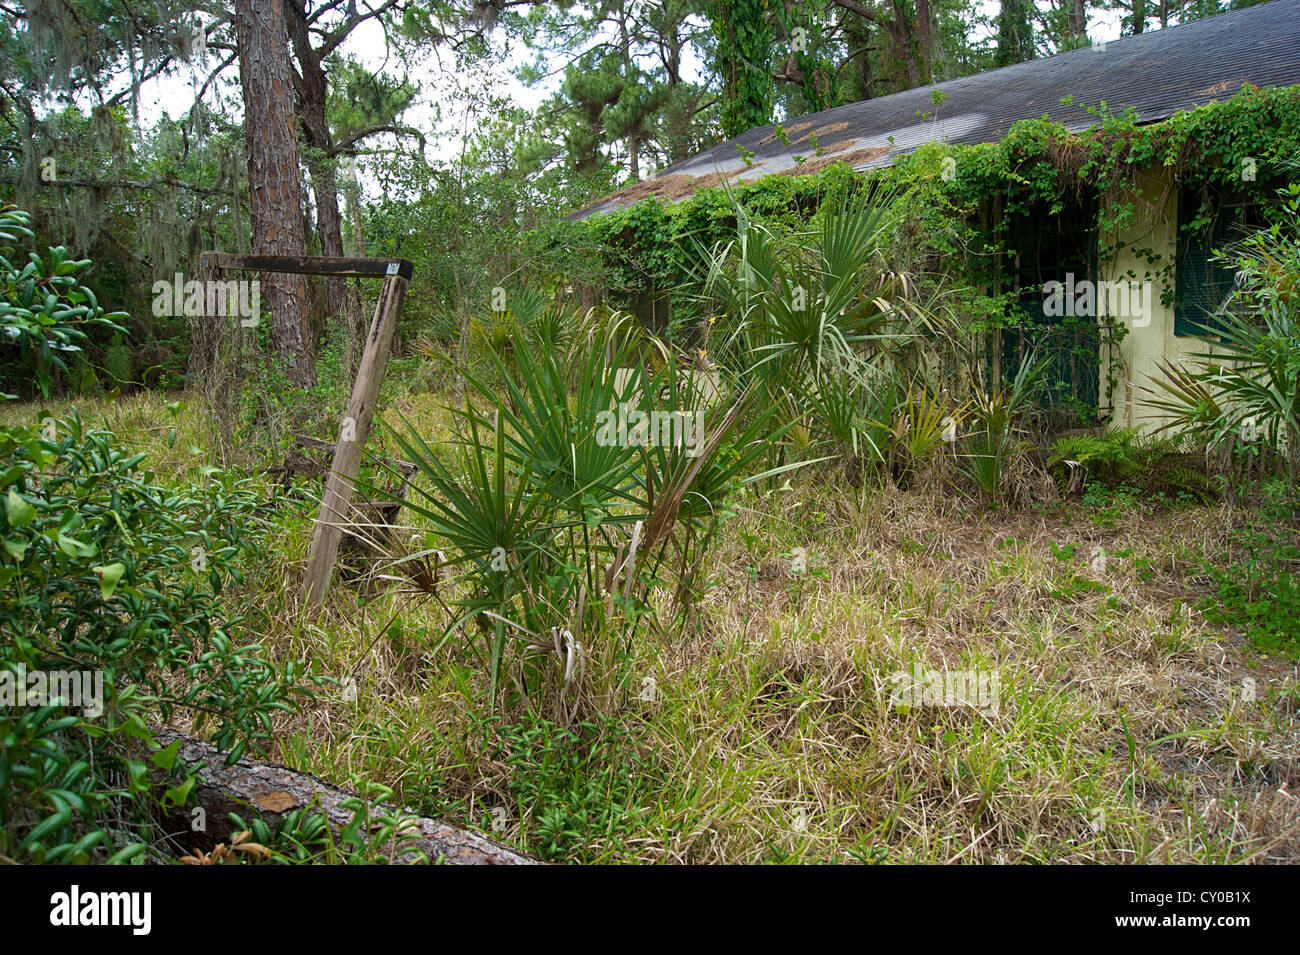 In the middle of an overgrown yard in south florida is an old abandoned overgrown yellow home. Stock Photo